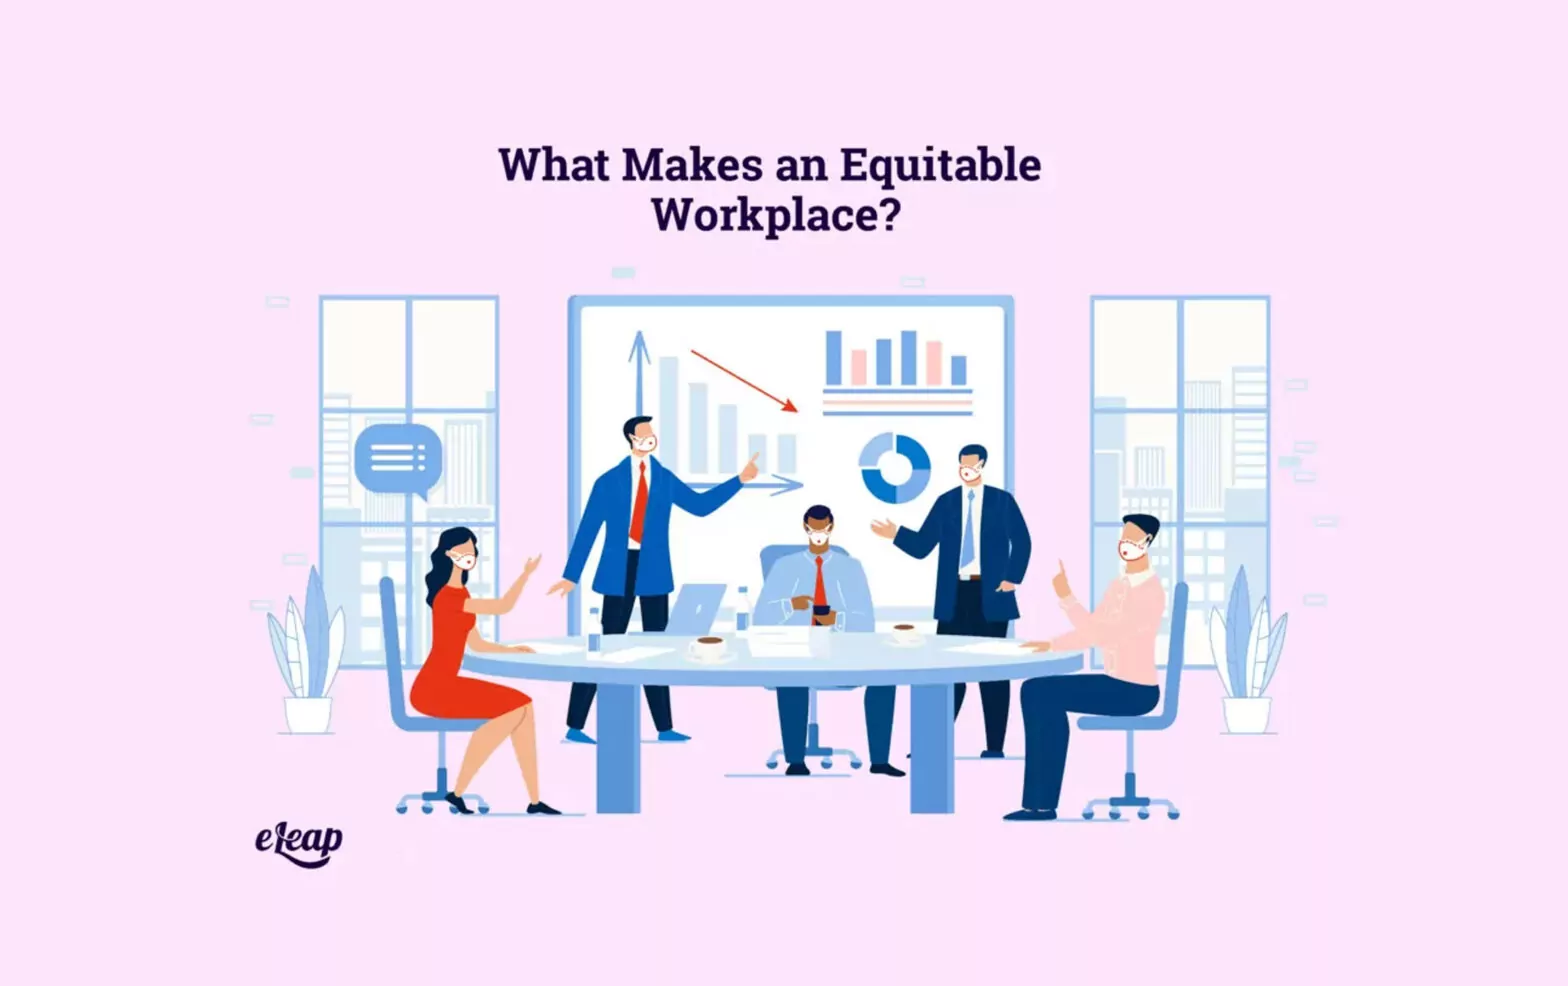 What Makes an Equitable Workplace?